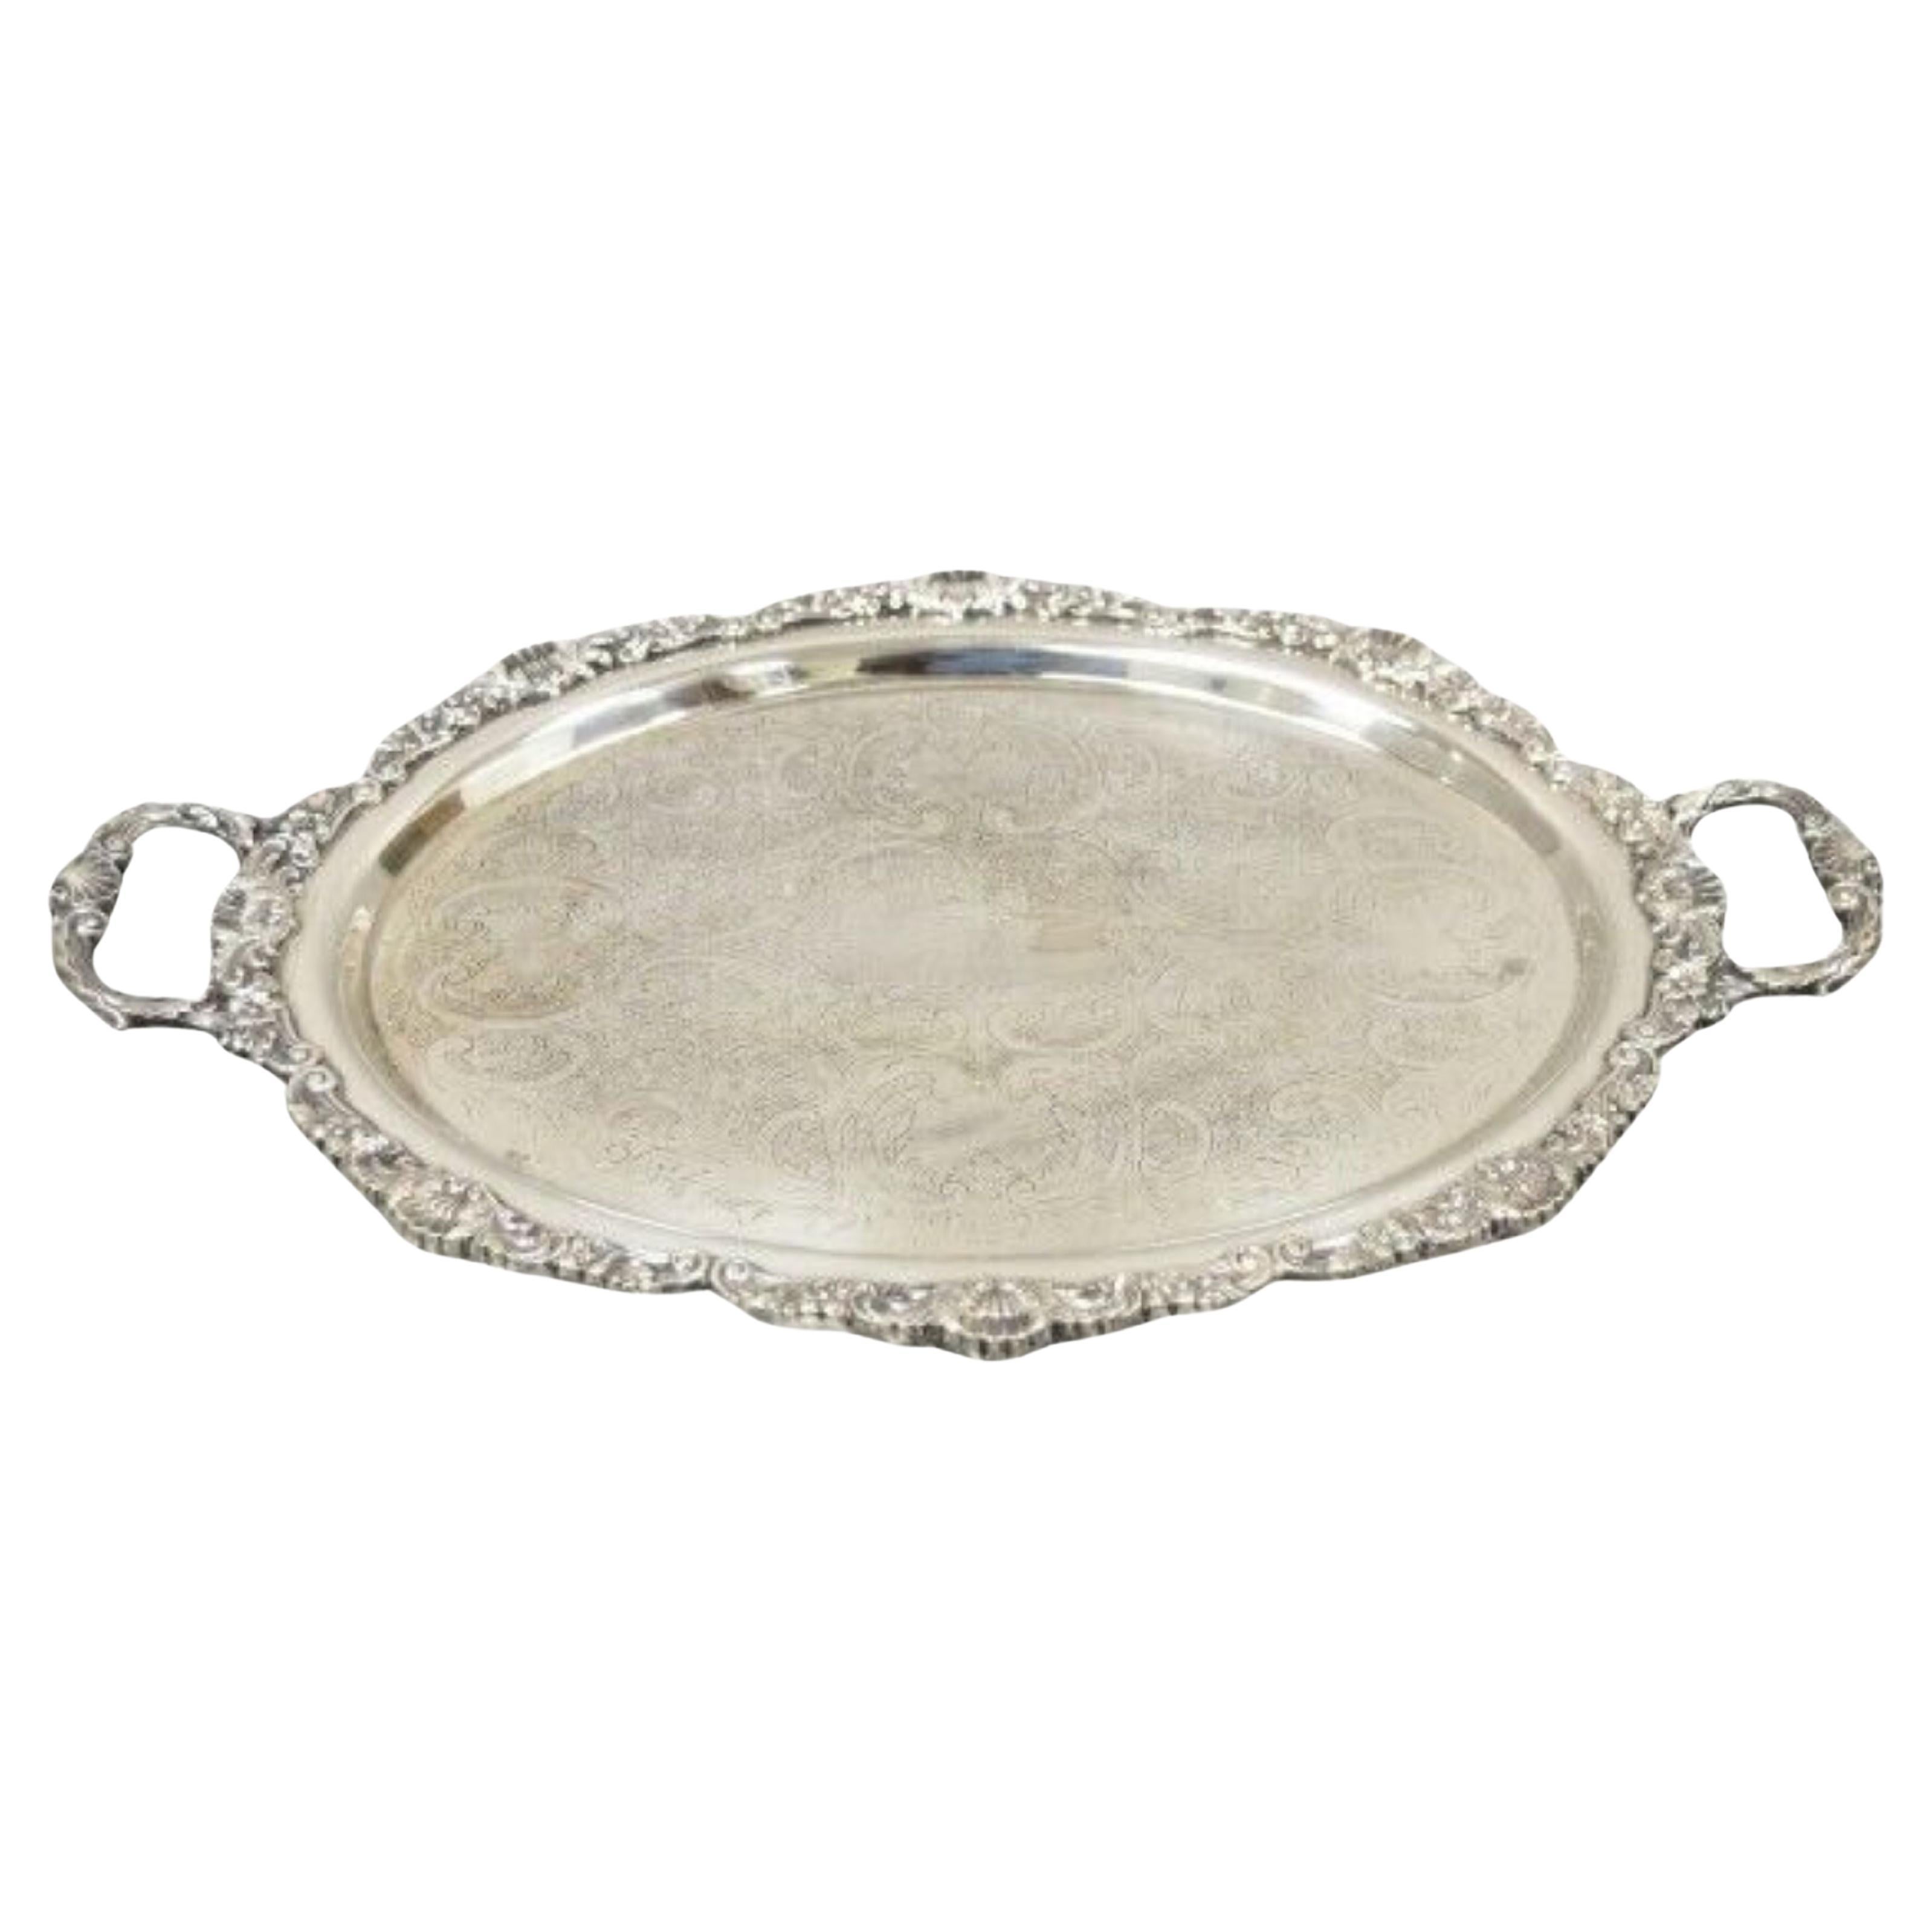 Vintage EPCA Bristol Silver by Poole 73 16 Silver Plated Oval Platter Tray For Sale